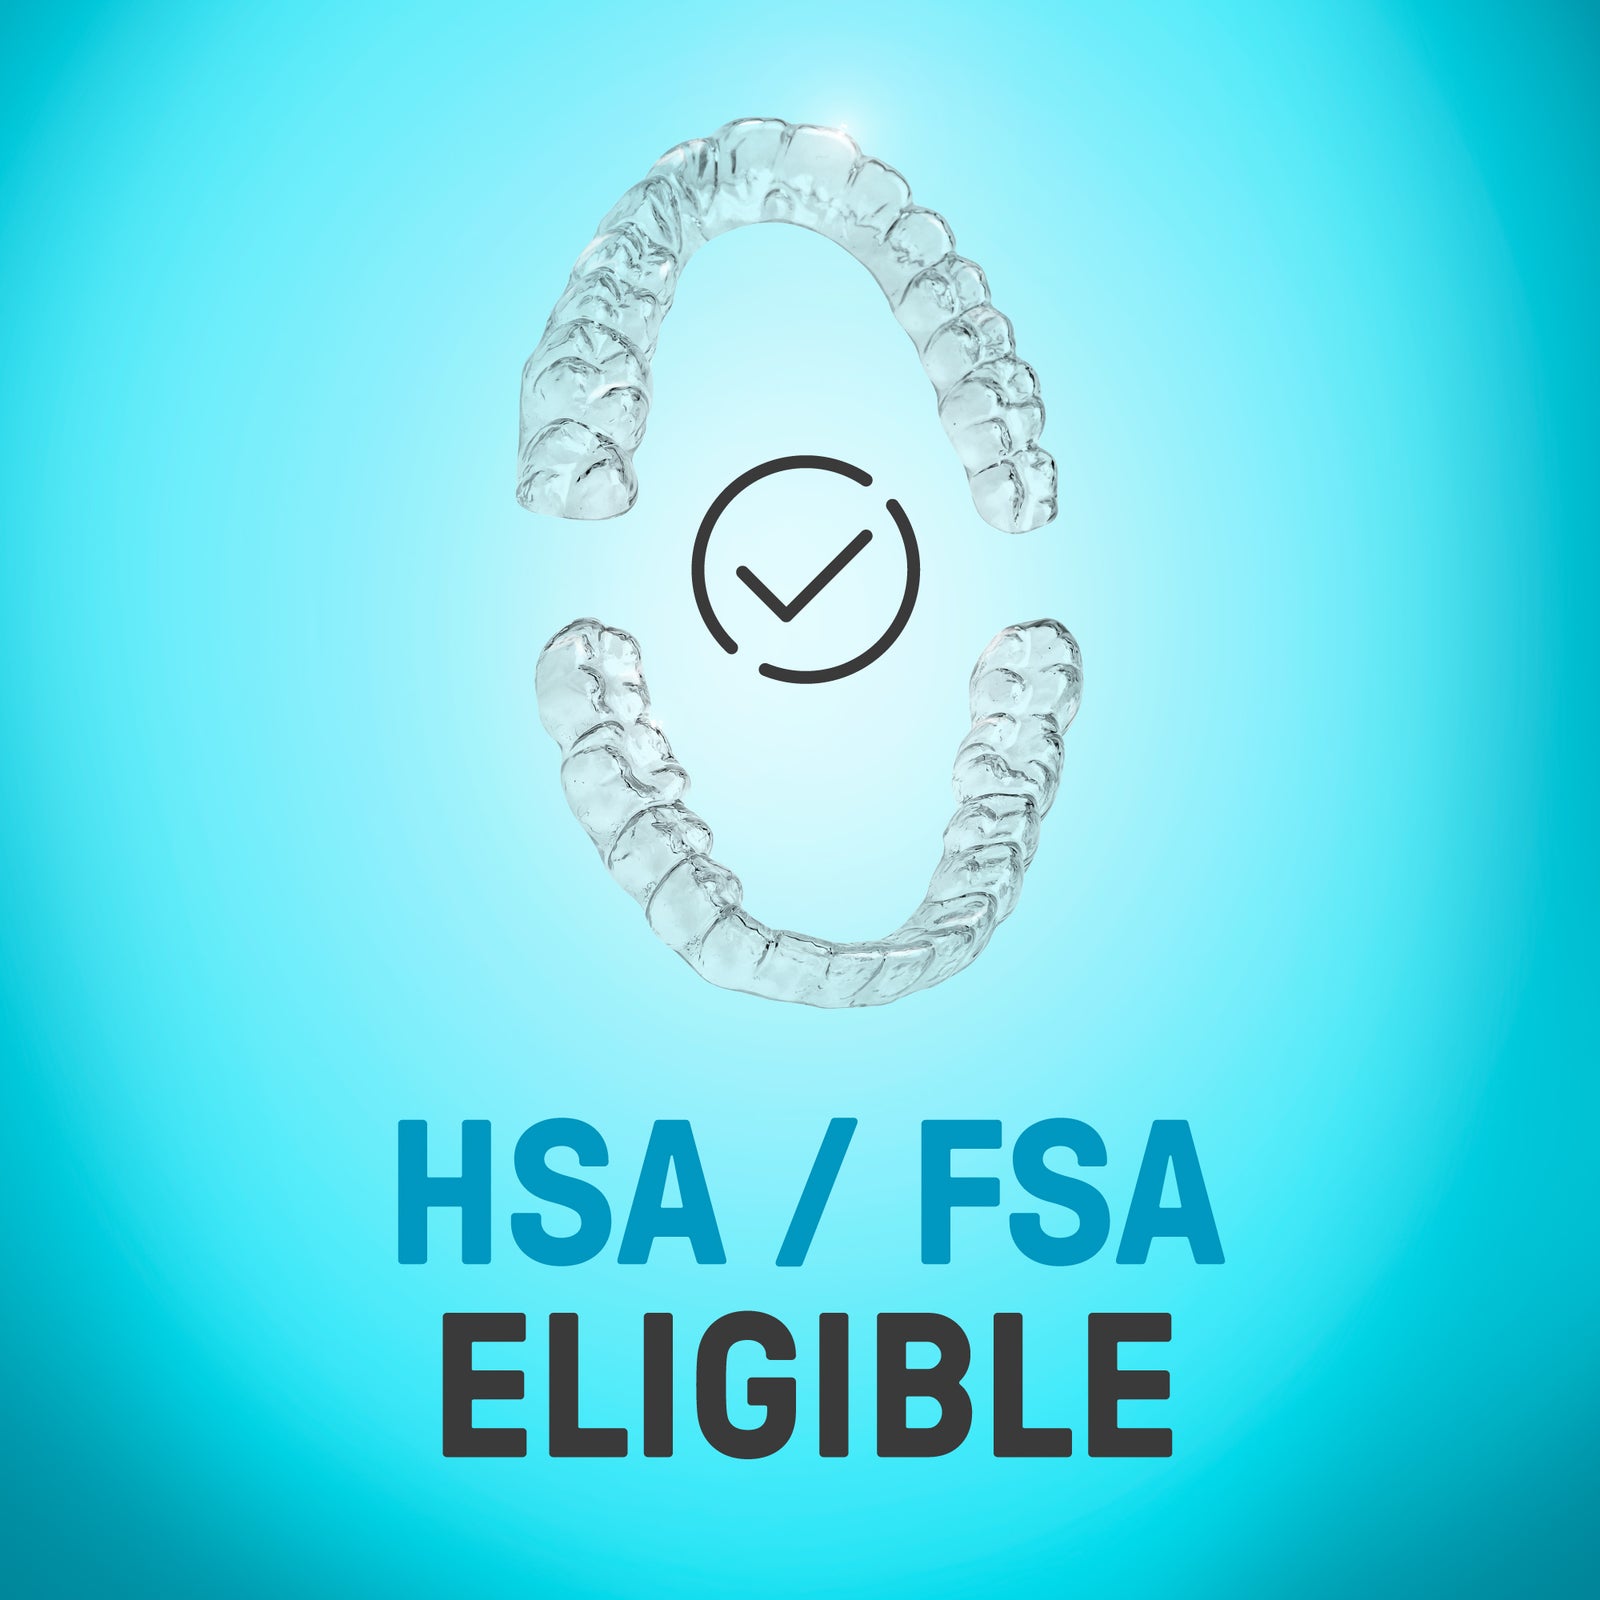 Clear orthodontic aligners with a checkmark, indicating they are eligible for health savings account (hsa) or flexible spending account (fsa) expenses.